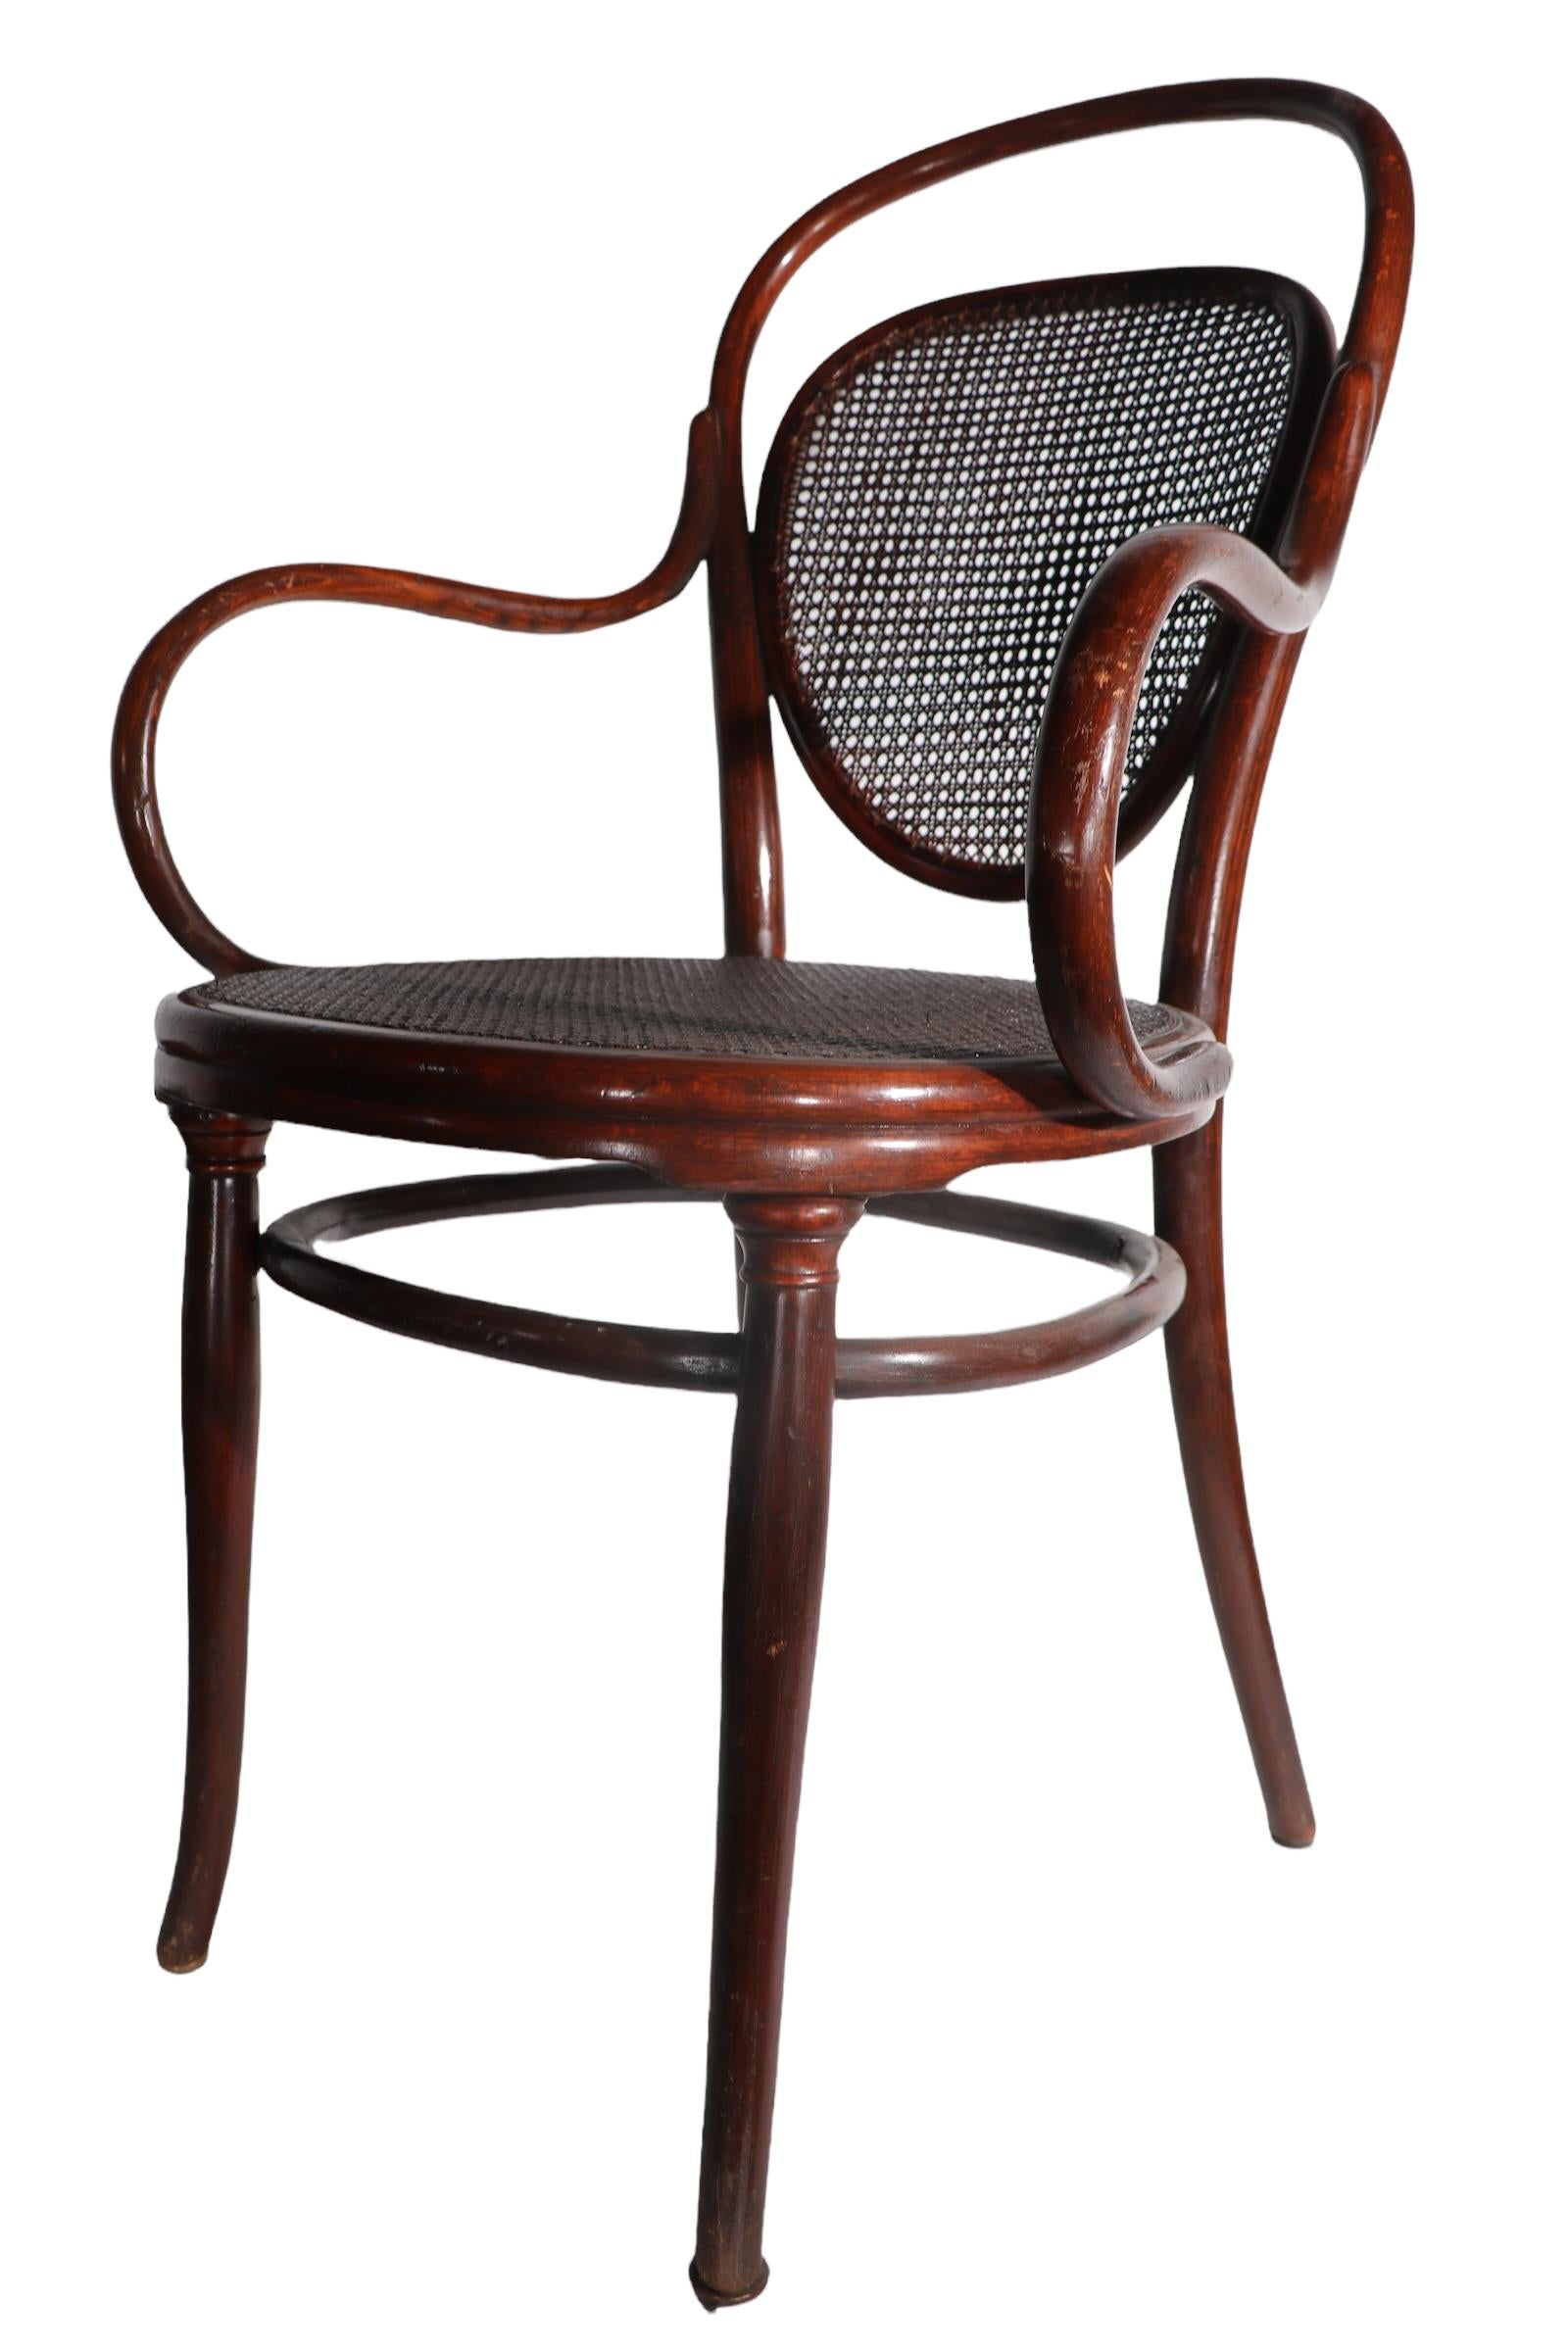 20th Century Vienna Secessionist Bentwood Arm Chair Att. to J & J Kohn in the Style of Thonet